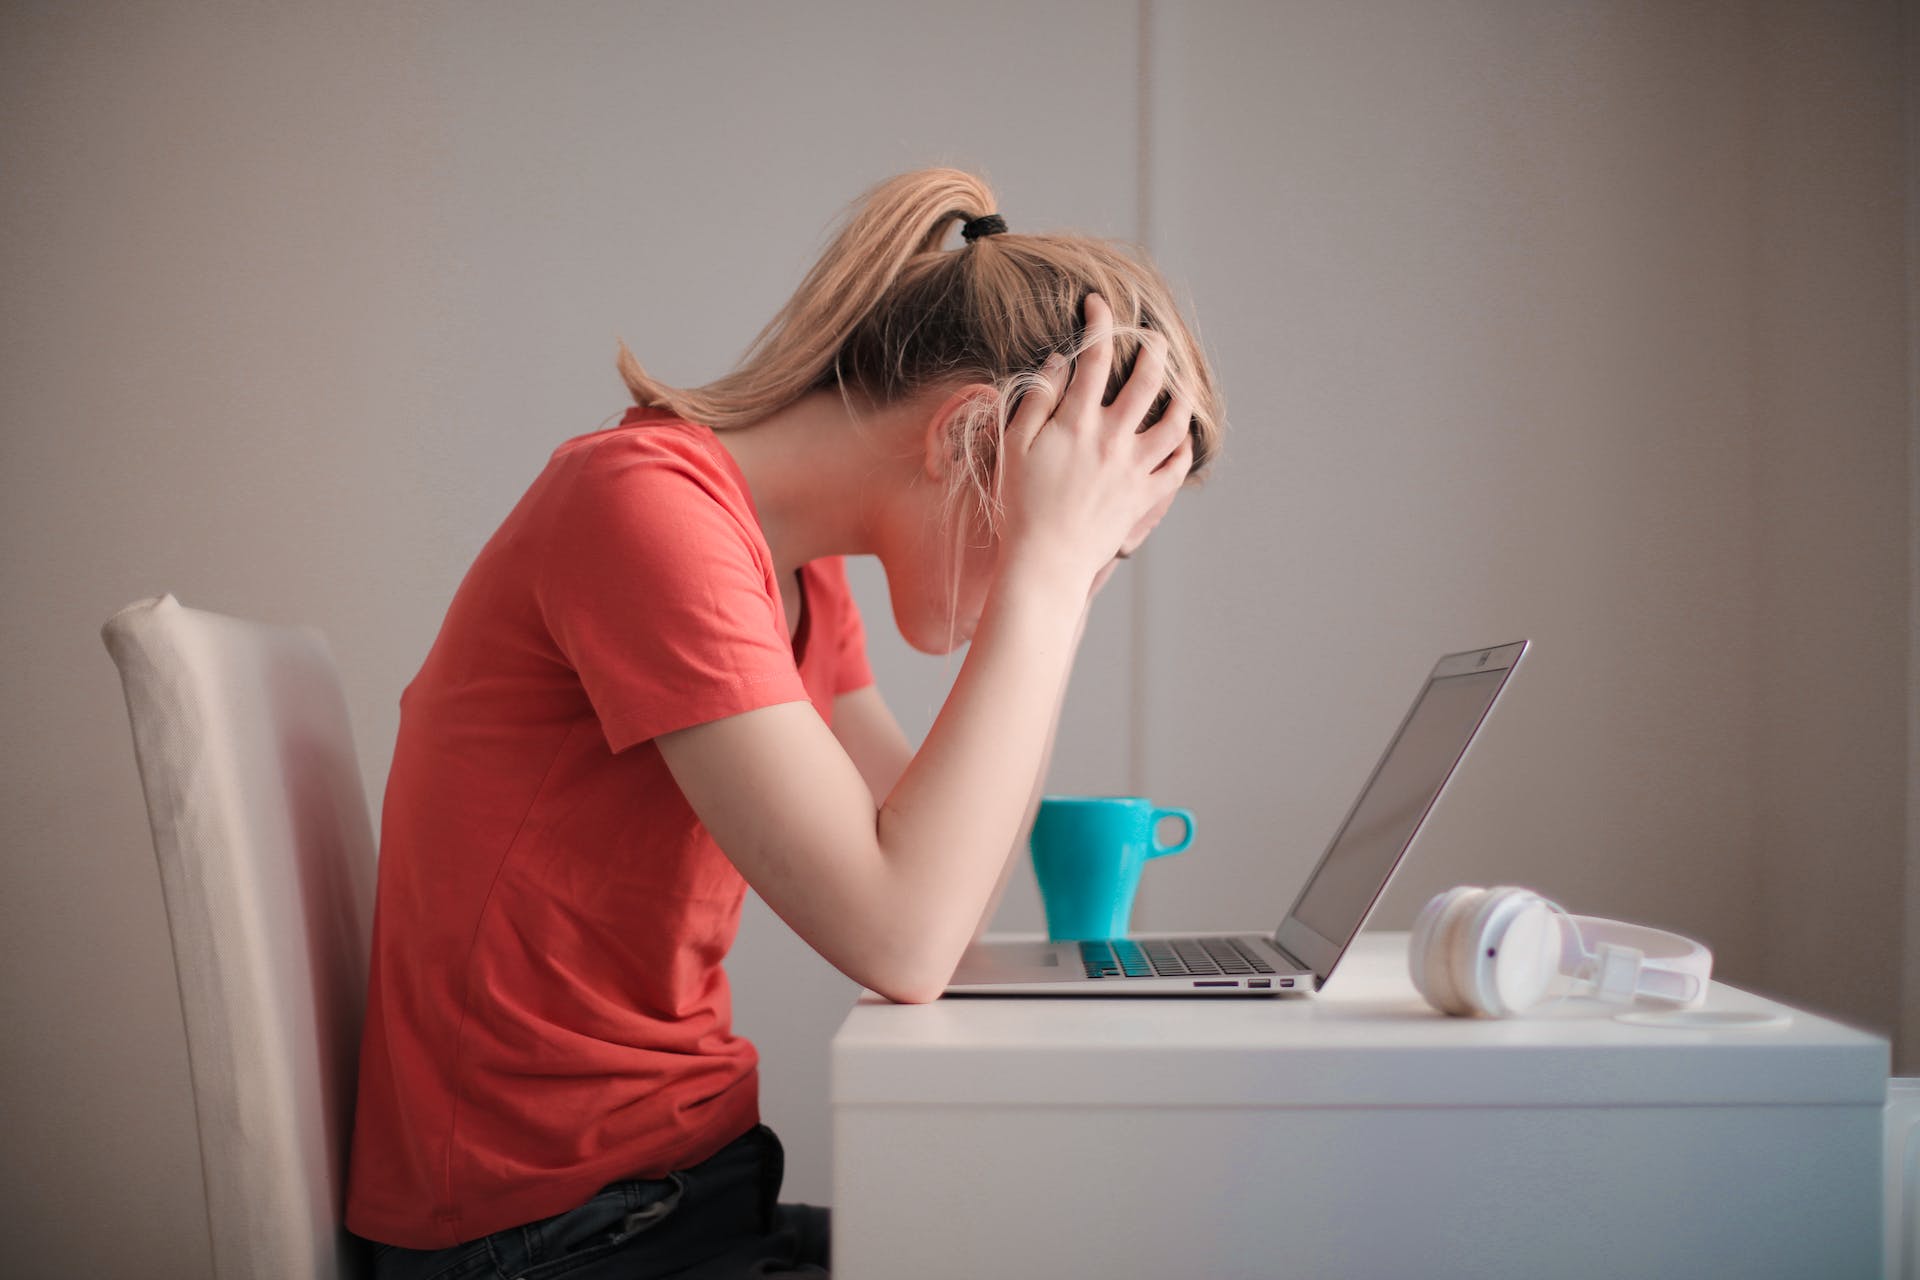 A stressed woman sitting on her desk | Source: Pexels